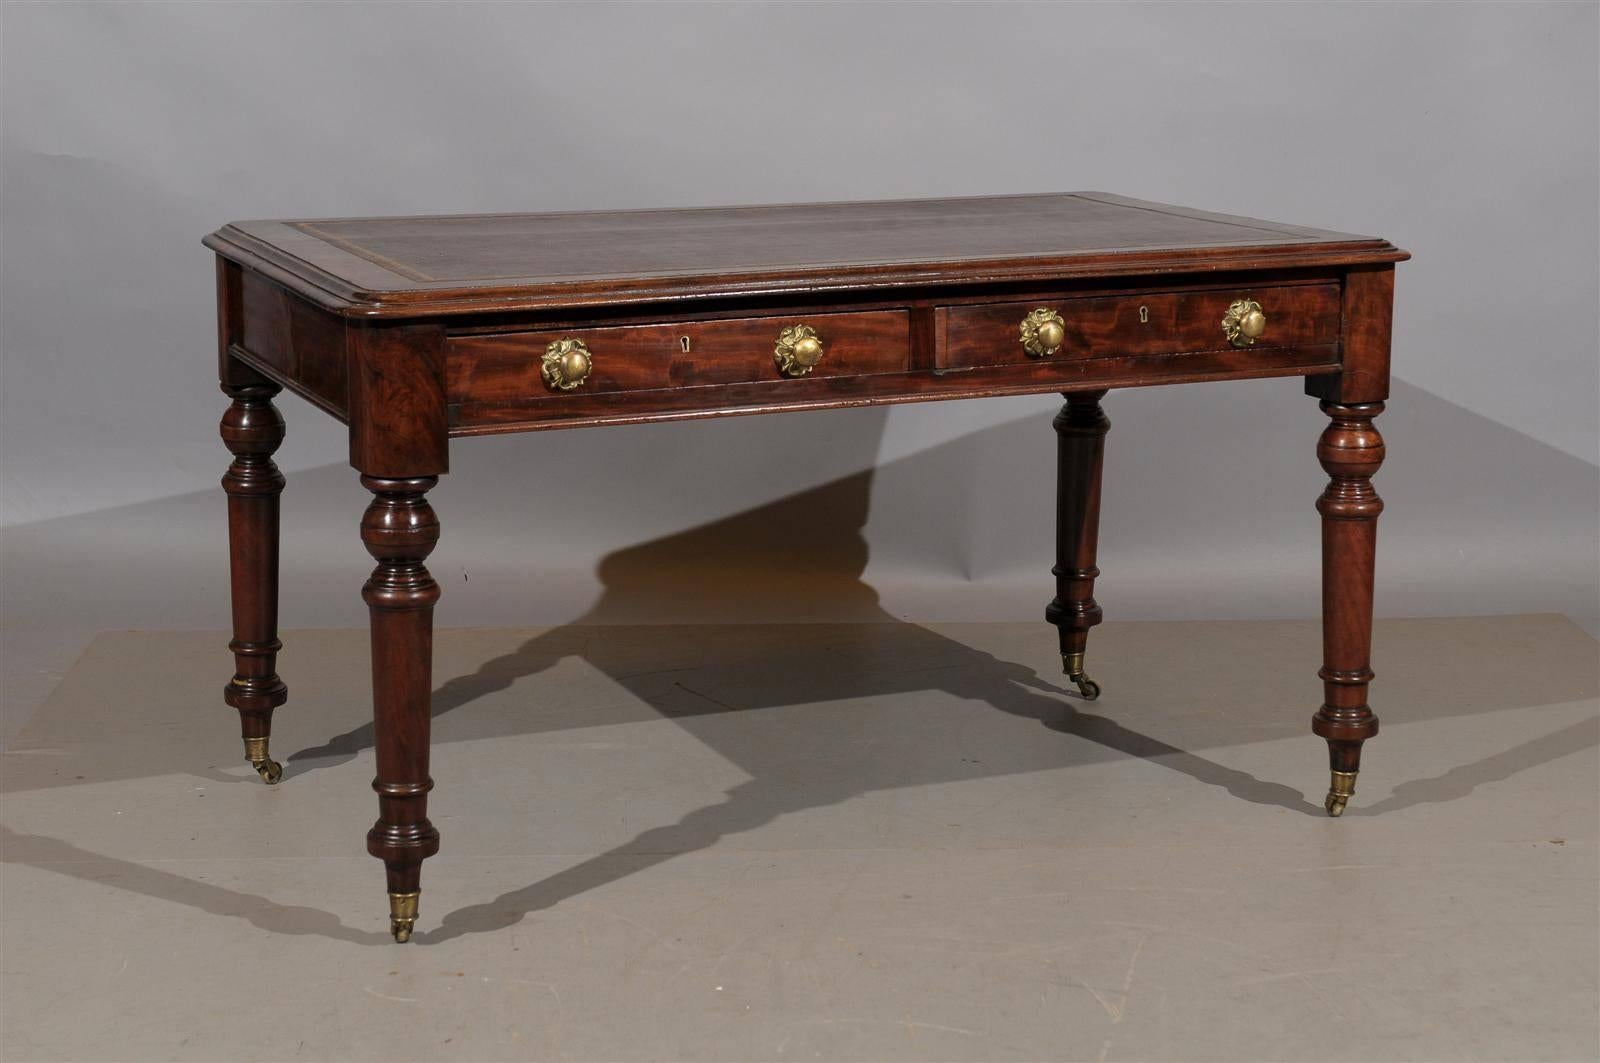 19th century English writing table with brown leather top, two drawers and turned legs.